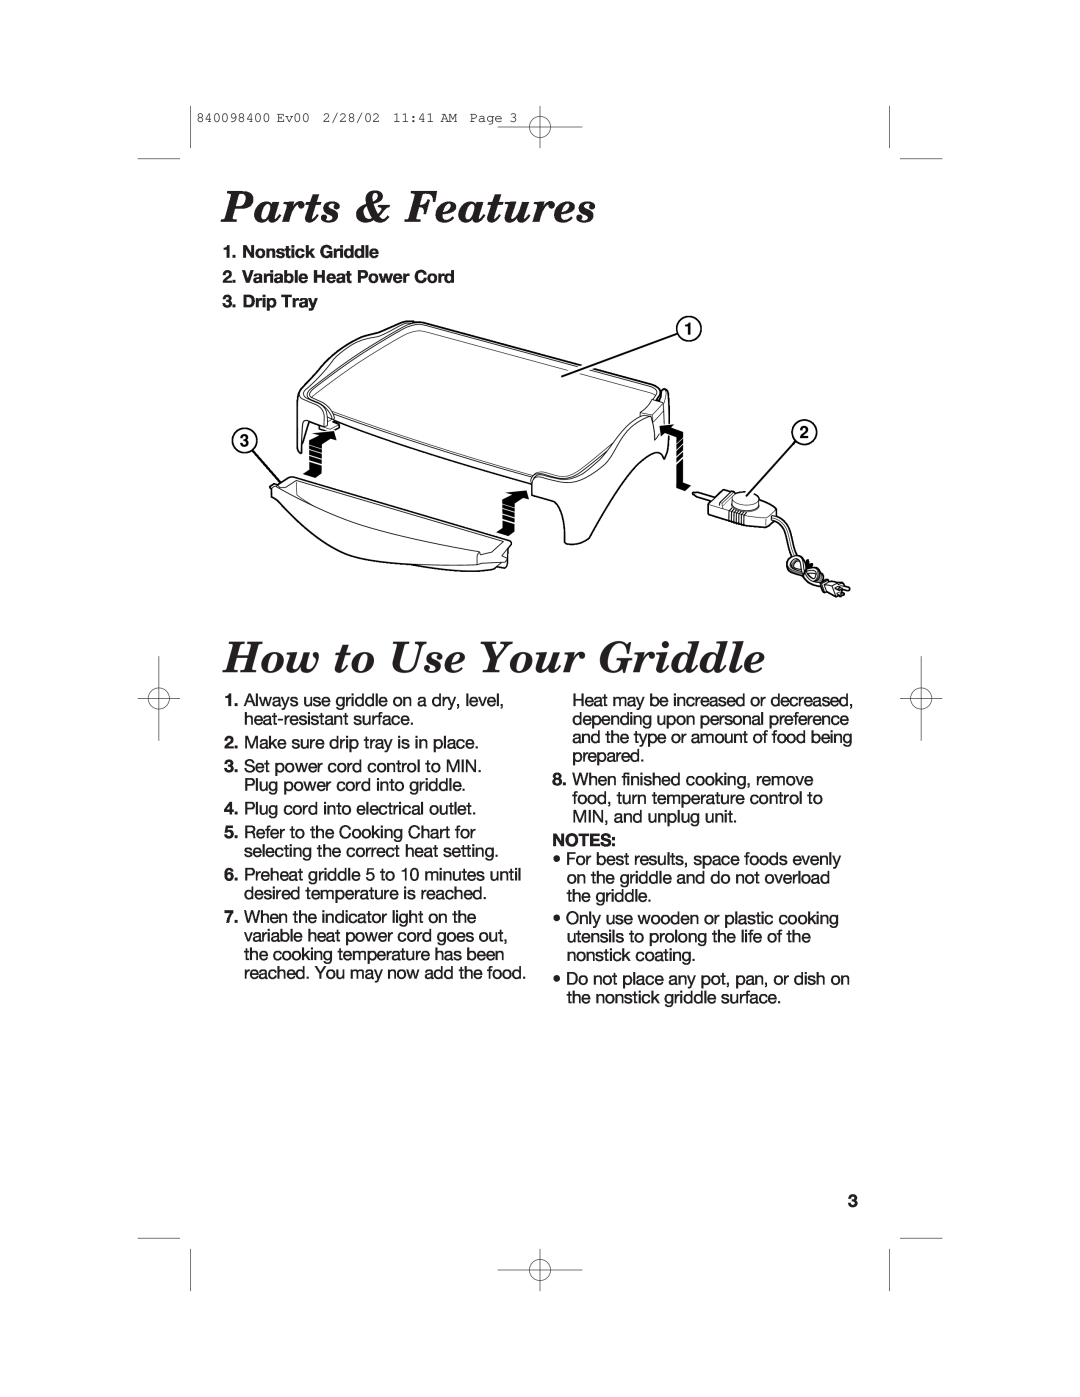 Hamilton Beach Electric Griddle Parts & Features, How to Use Your Griddle, Nonstick Griddle 2.Variable Heat Power Cord 